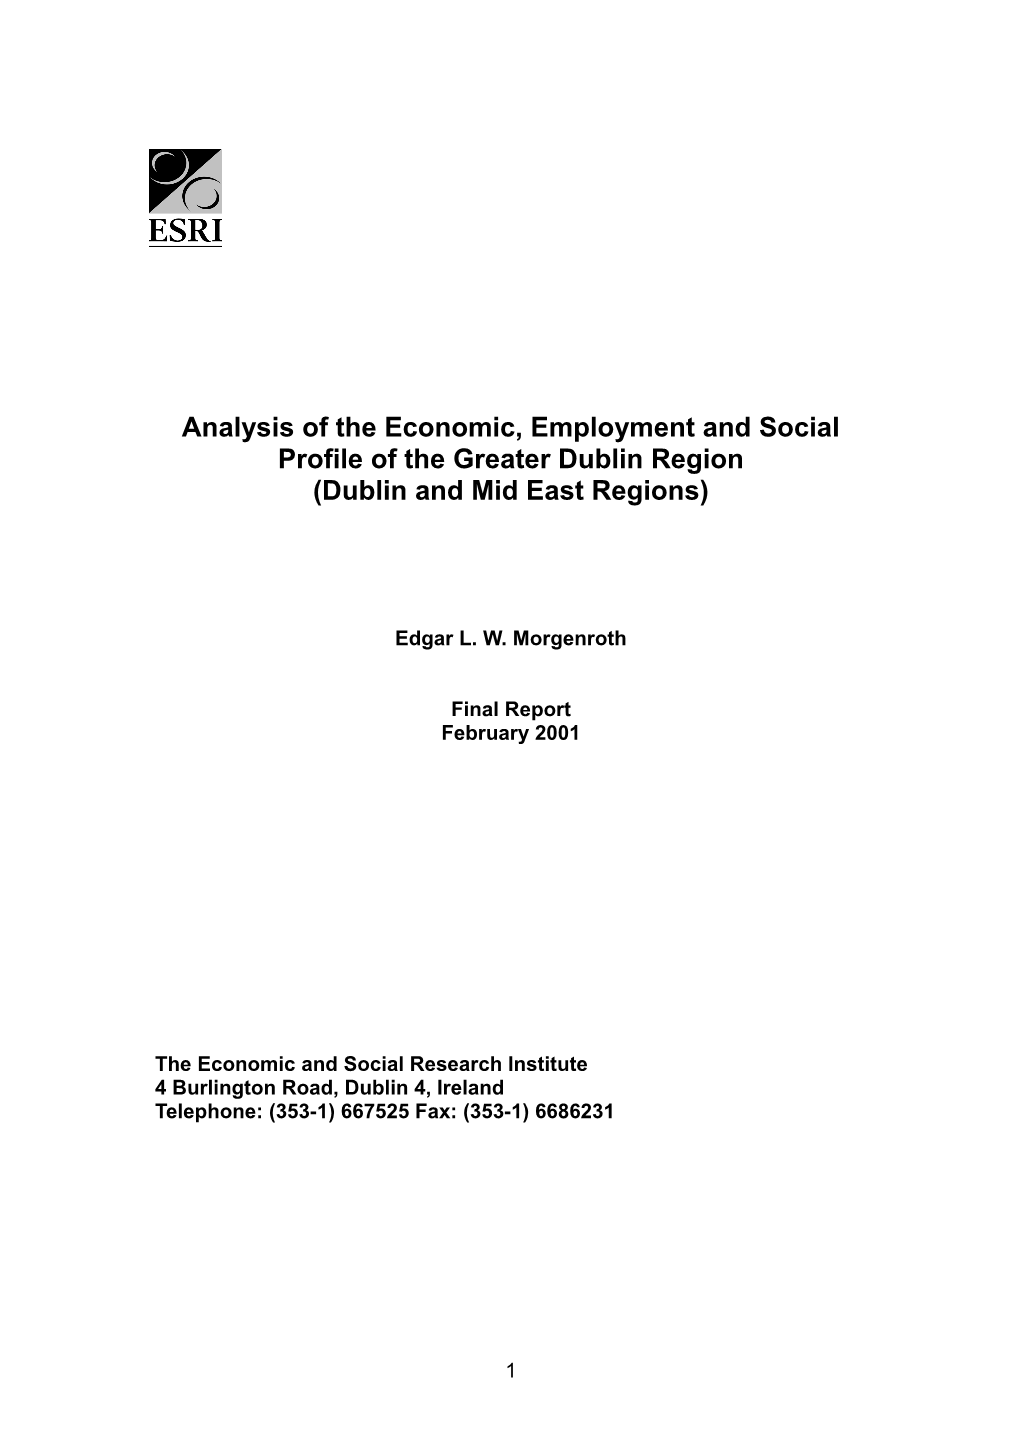 Analysis of the Economic, Employment and Social Profile of the Greater Dublin Region